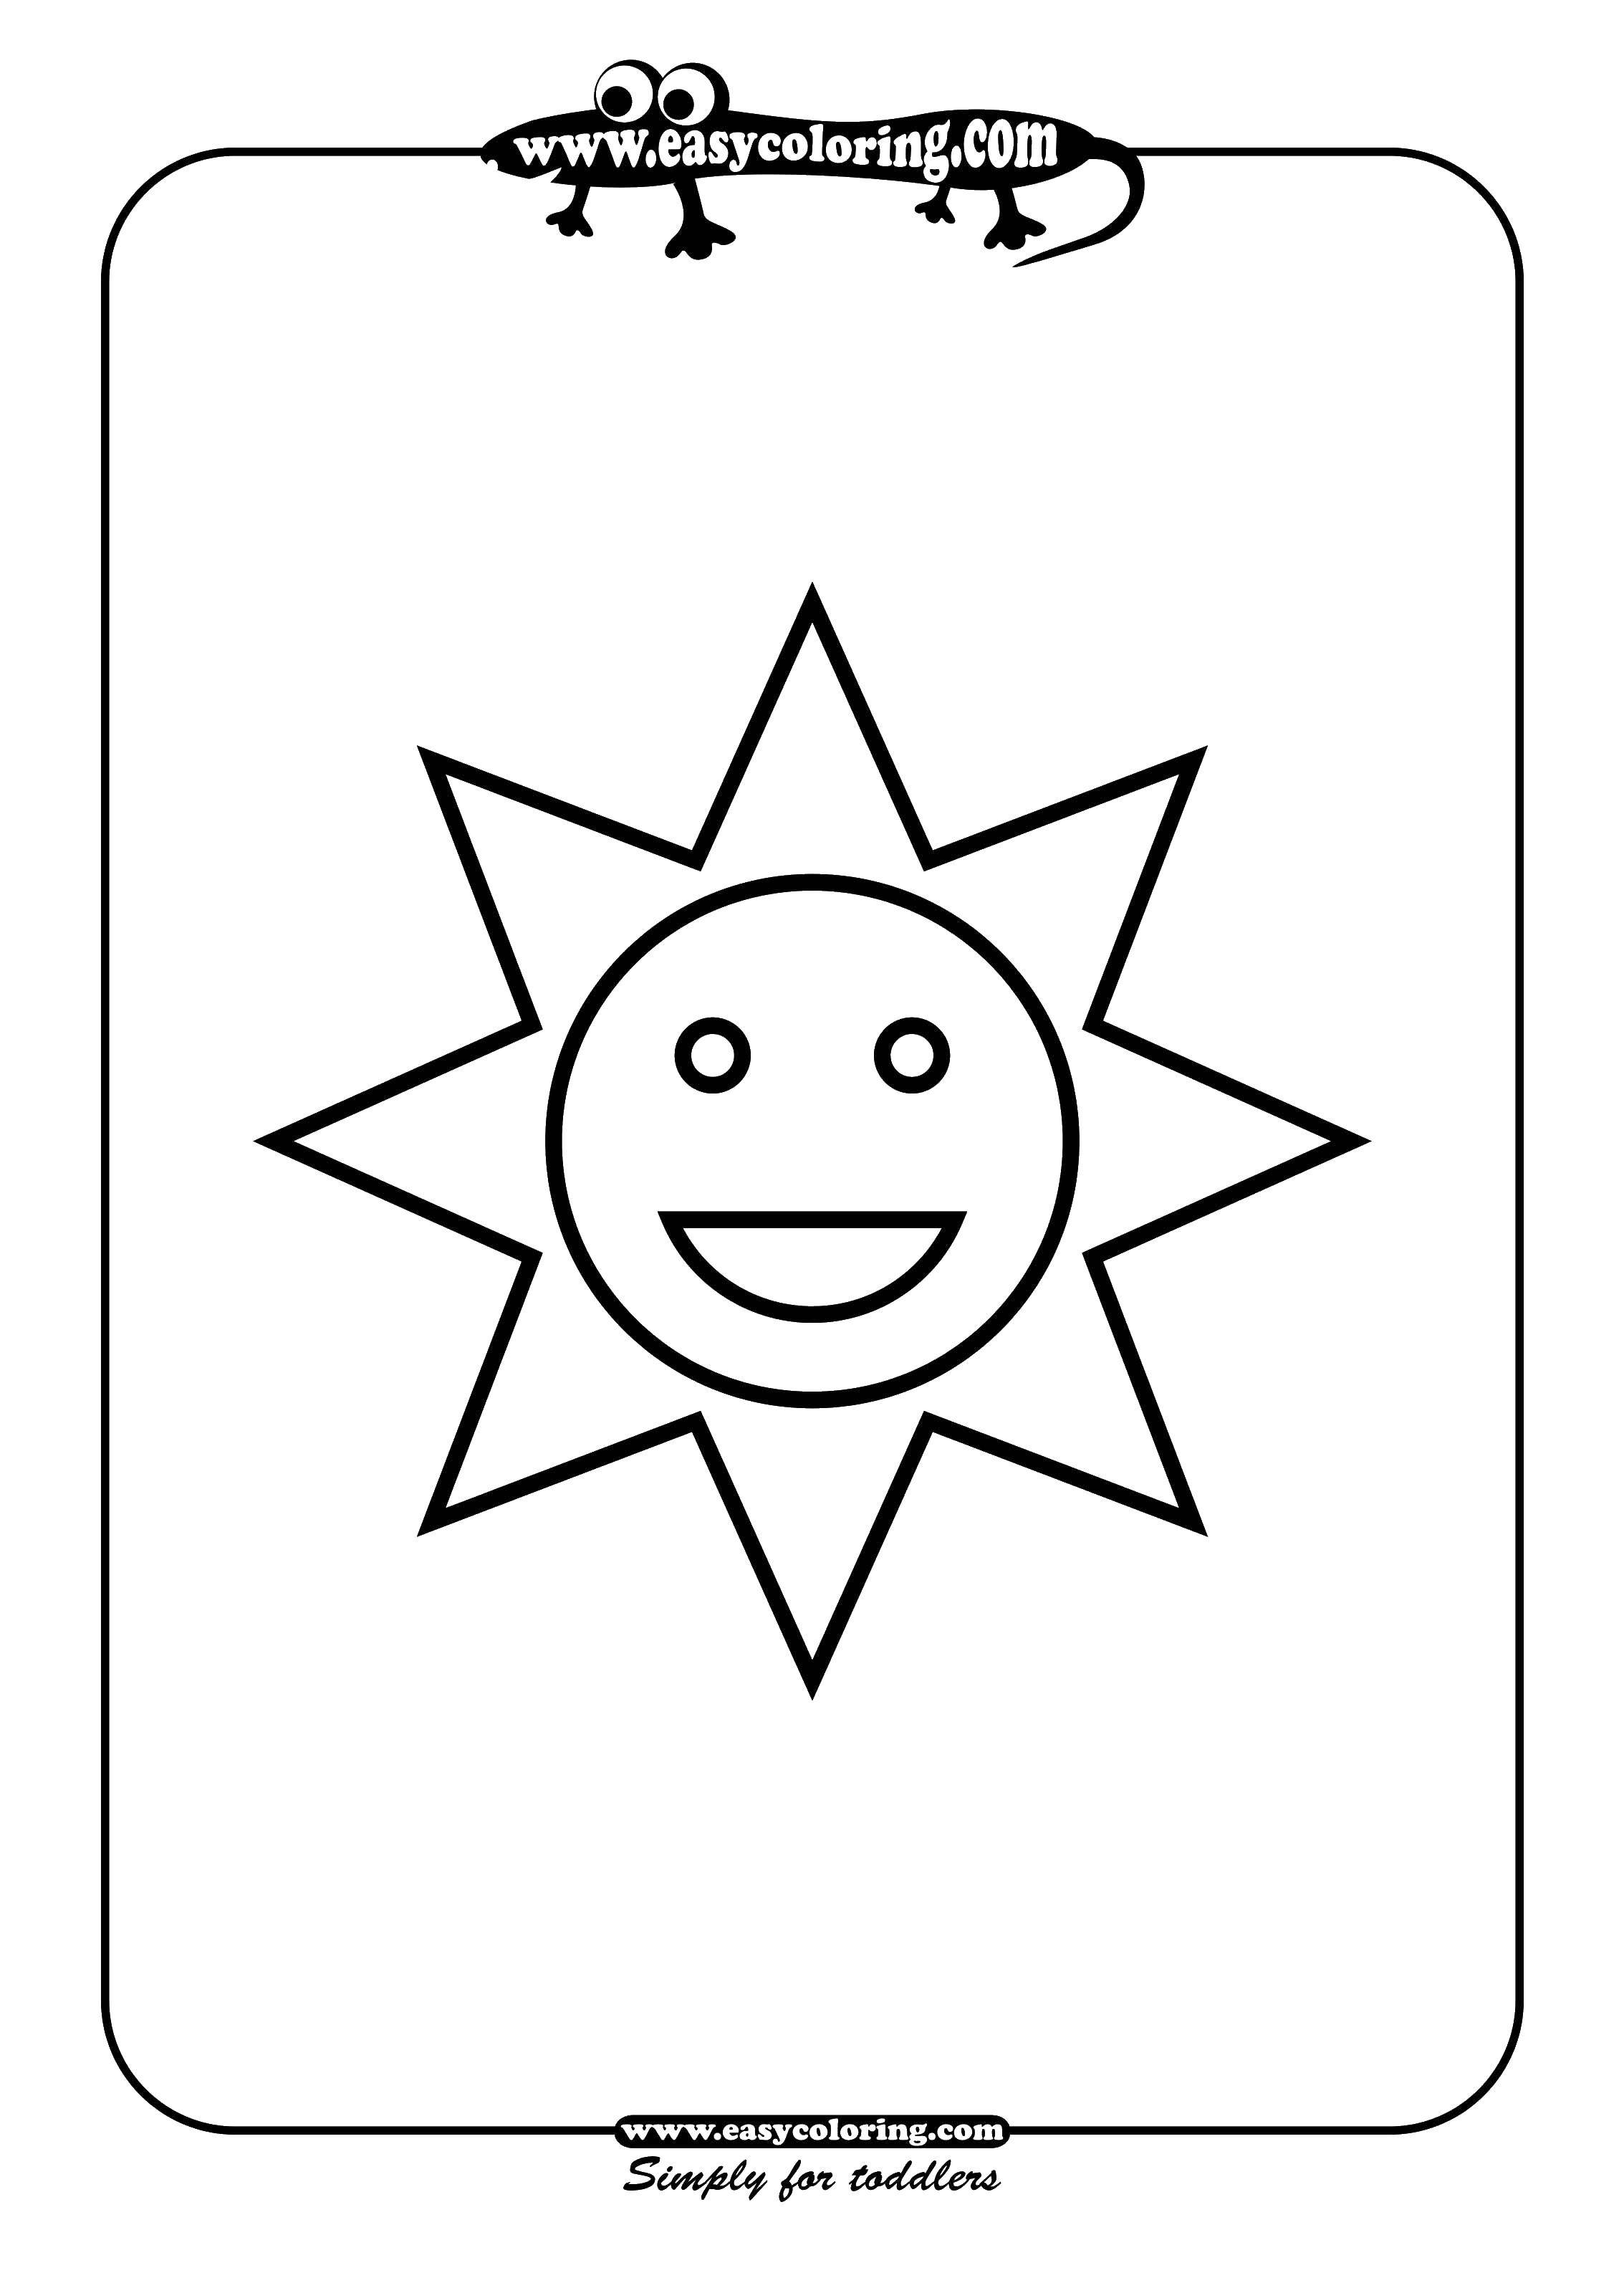 Coloring The sun. Category coloring. Tags:  sun, rays, eyes, mouth.